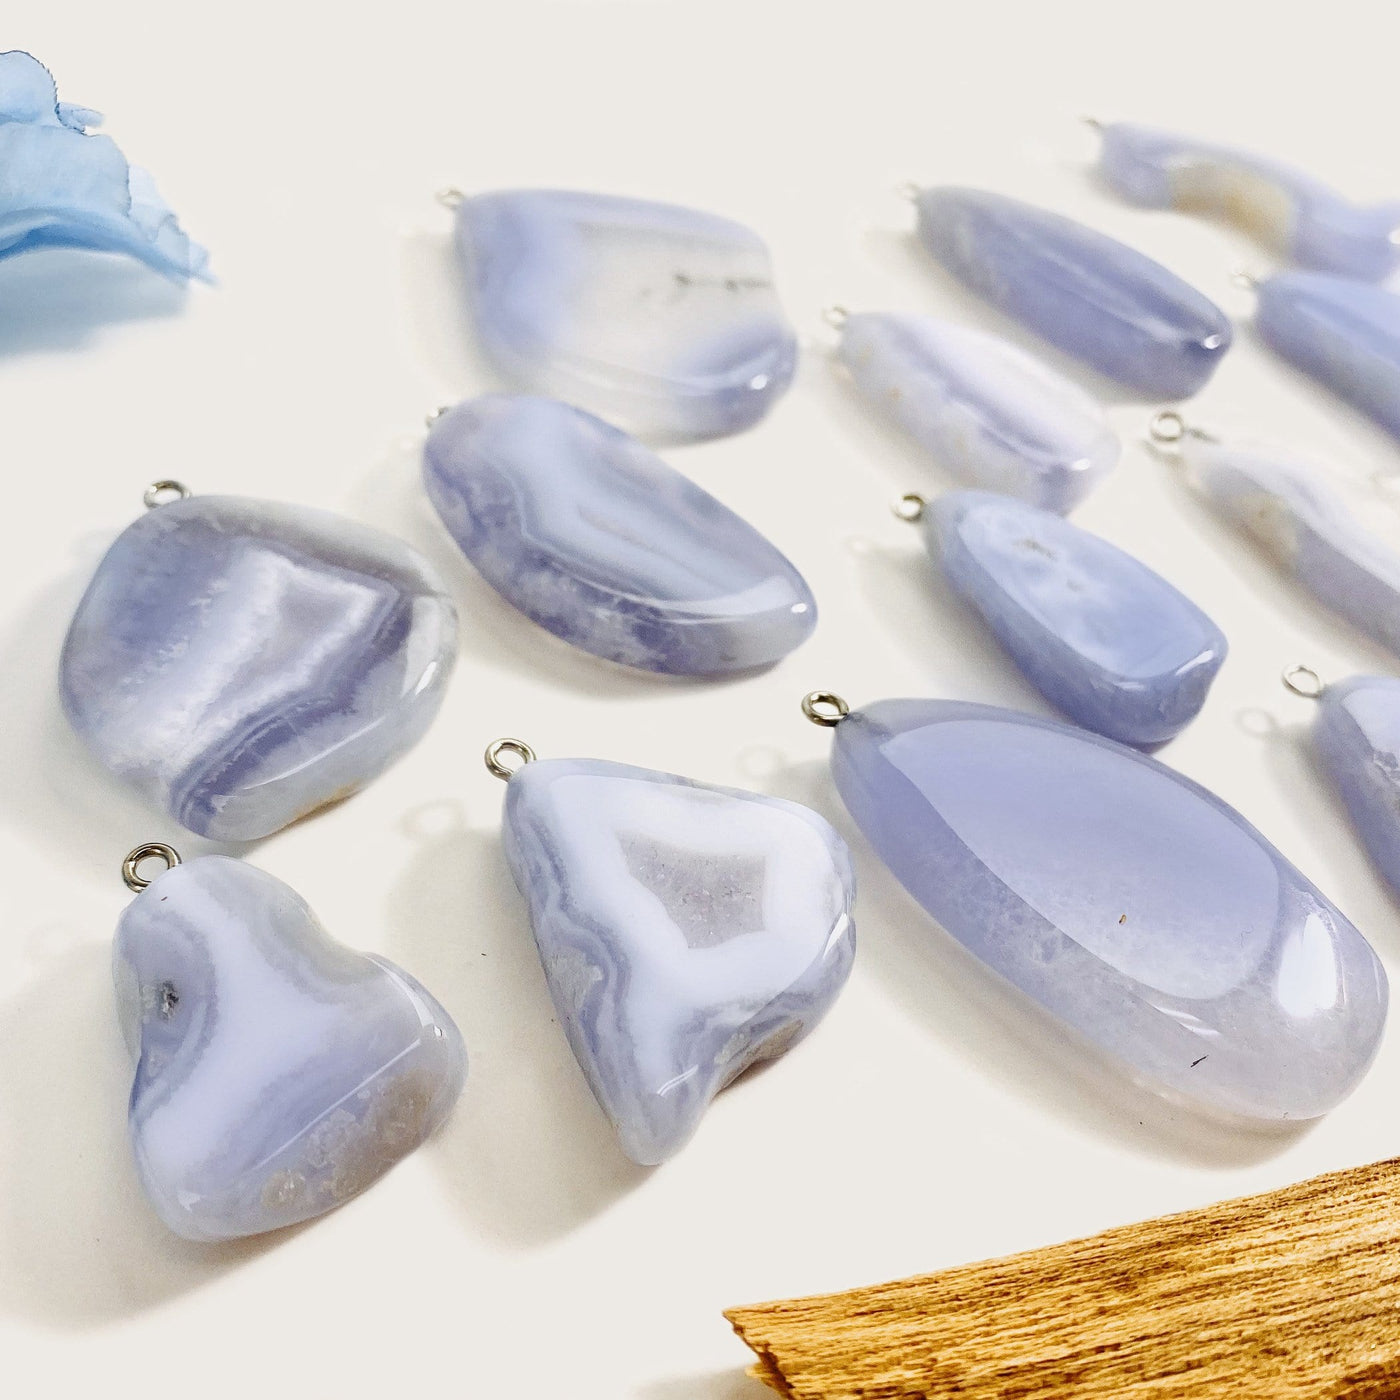 blue lace agate pendant displayed side view to show thickness variations